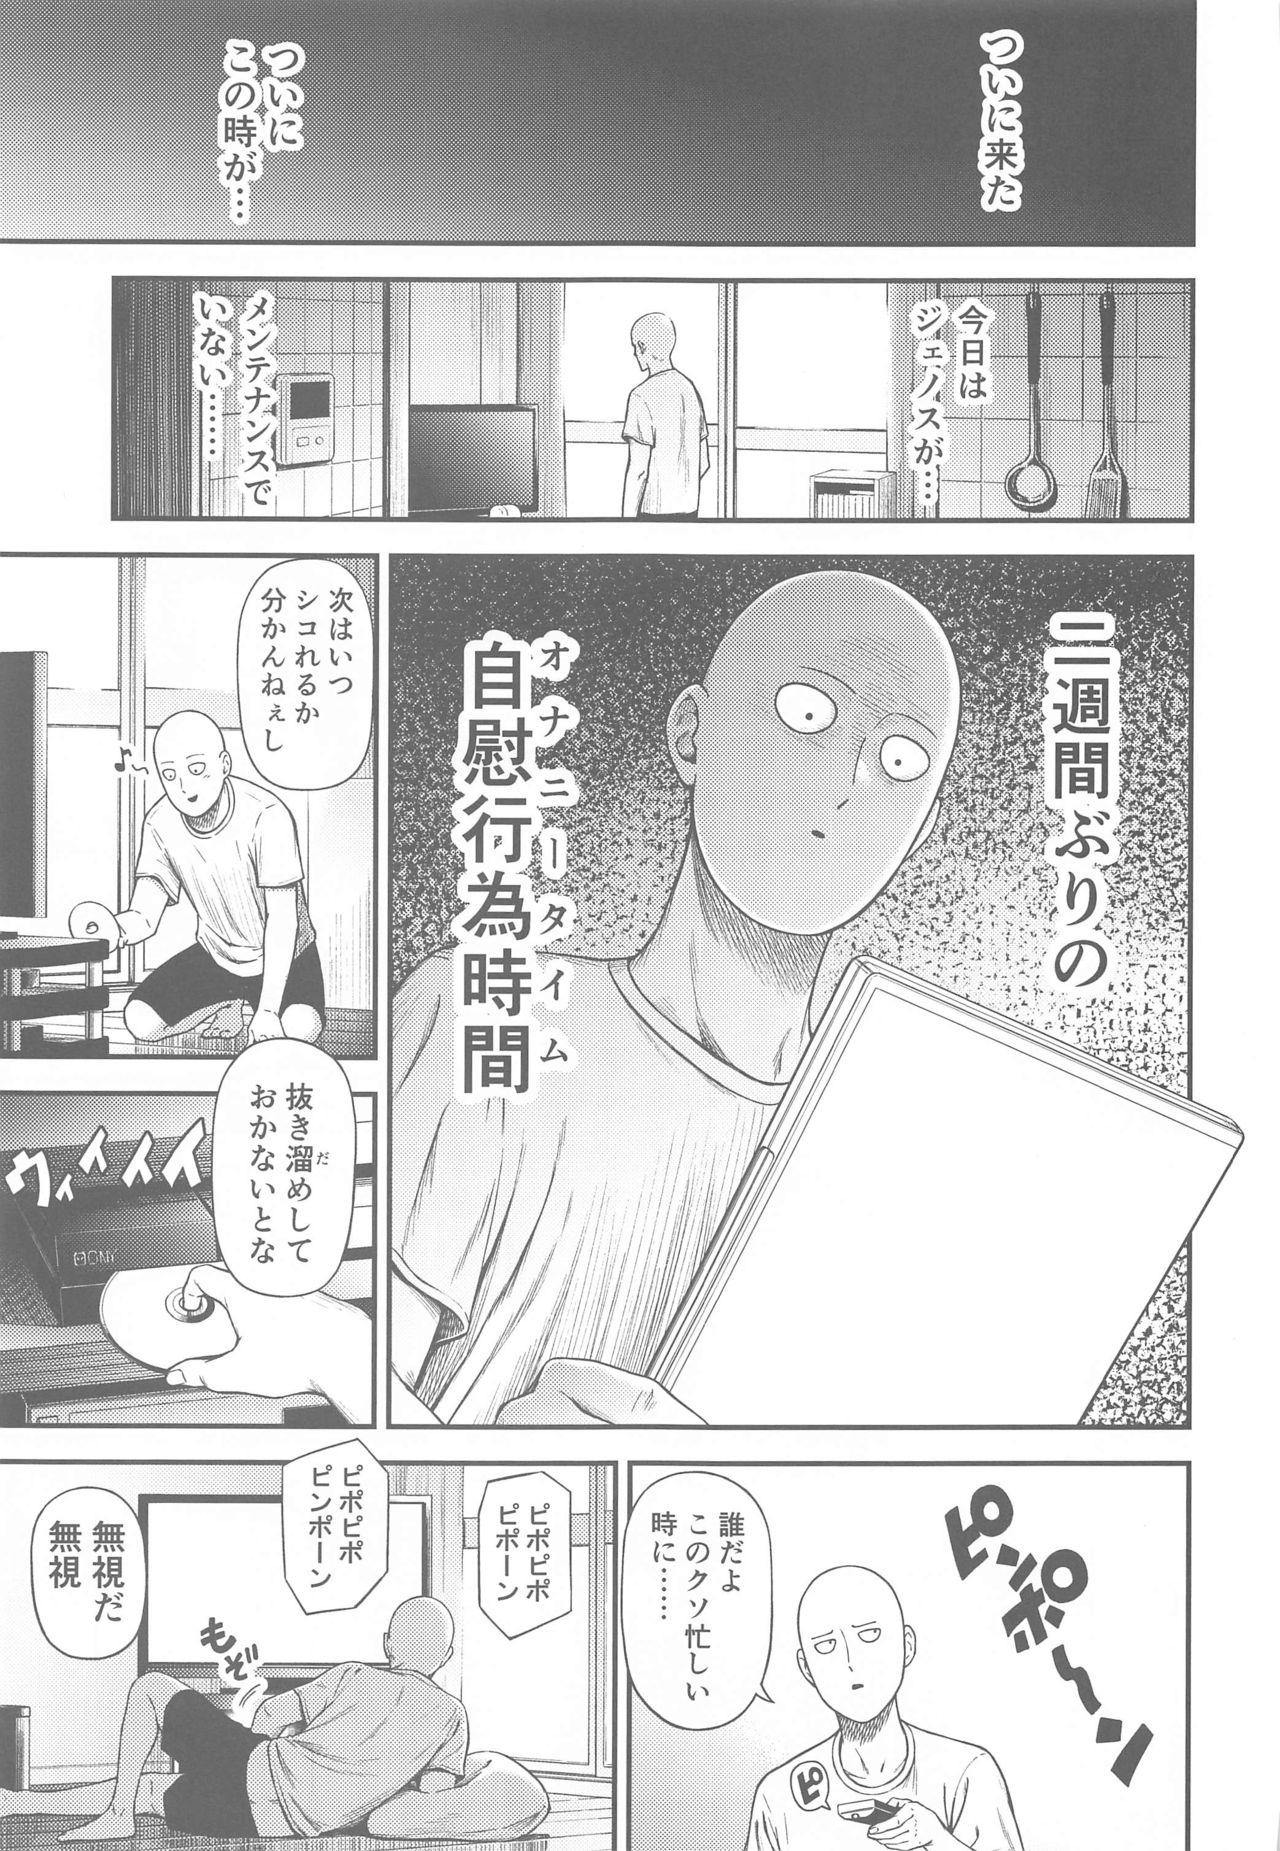 Scissoring ONE-HURRICANE 6.5 - One punch man Gay - Page 2